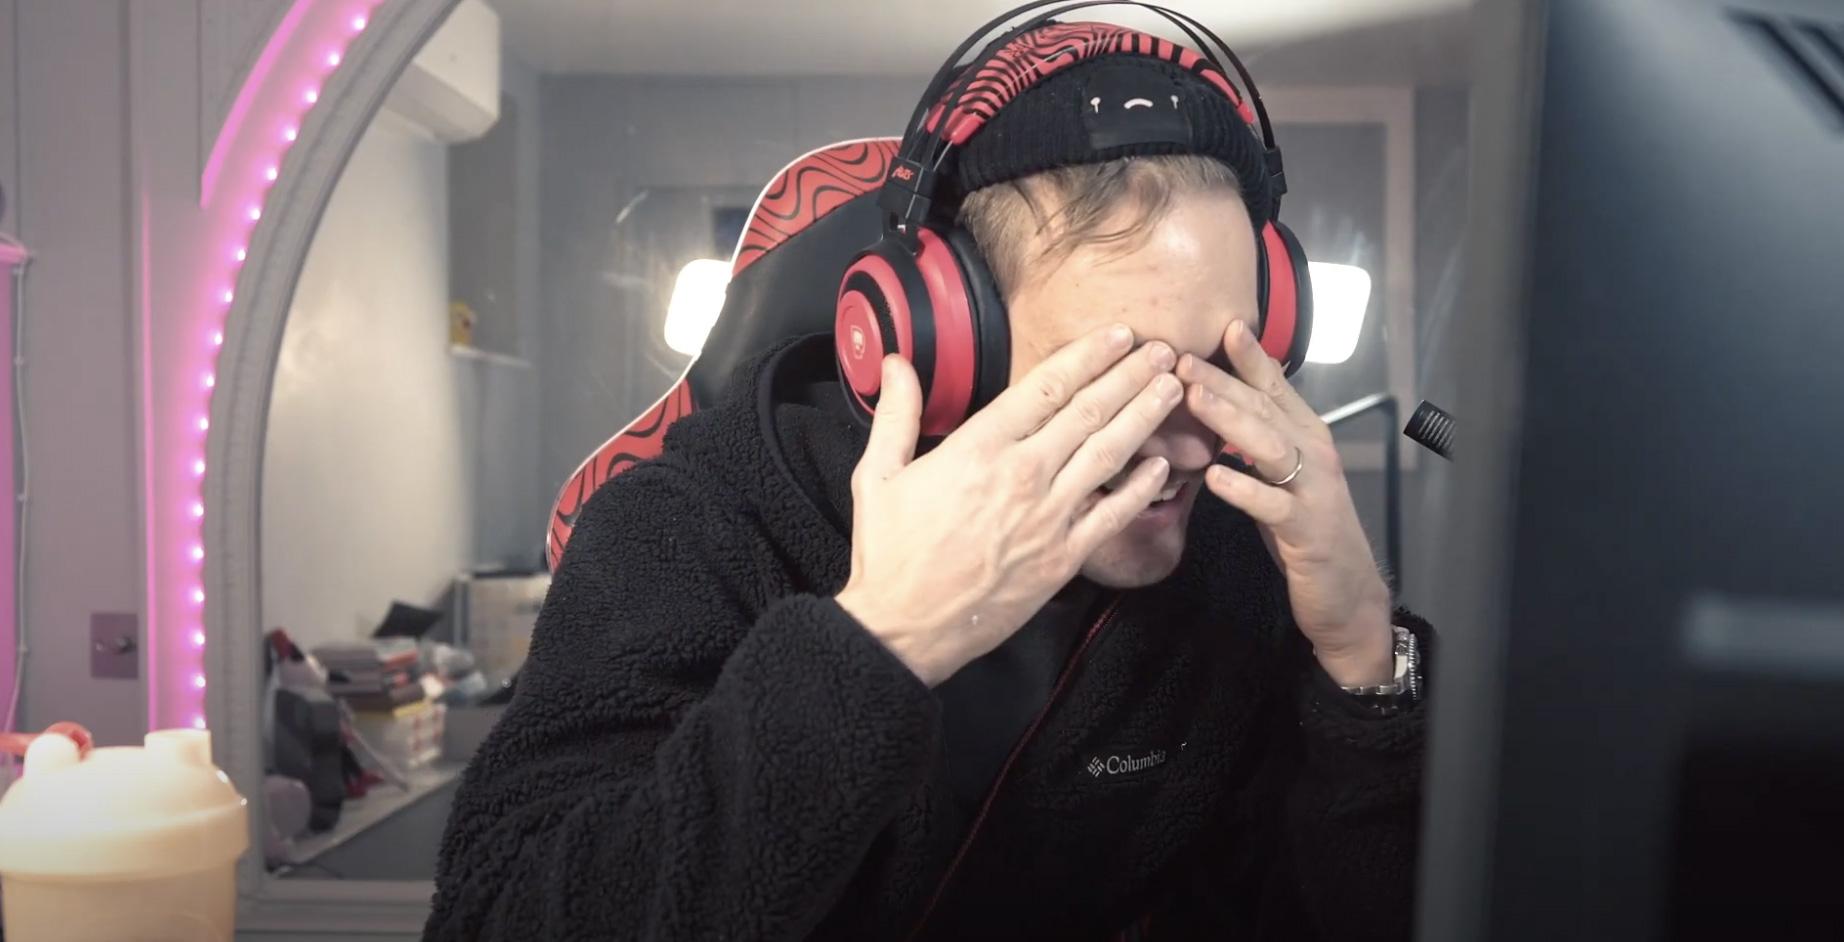 YouTuber PewDiePie with his hands over his face.